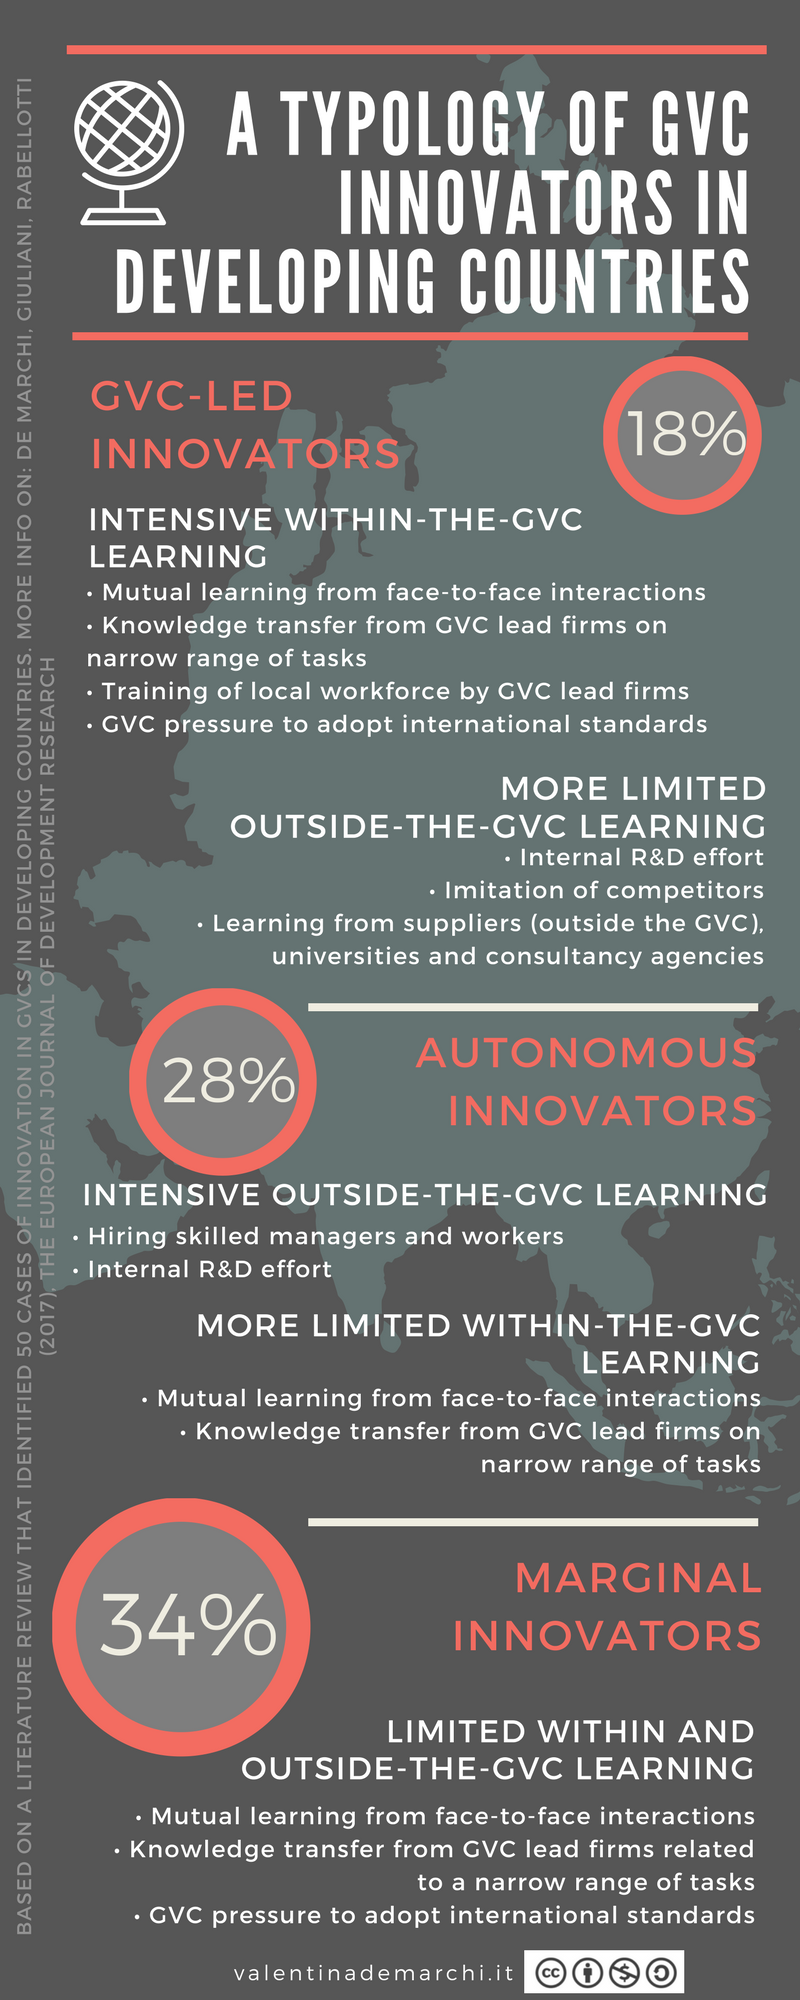 Copy of GVC innovators in developing countries